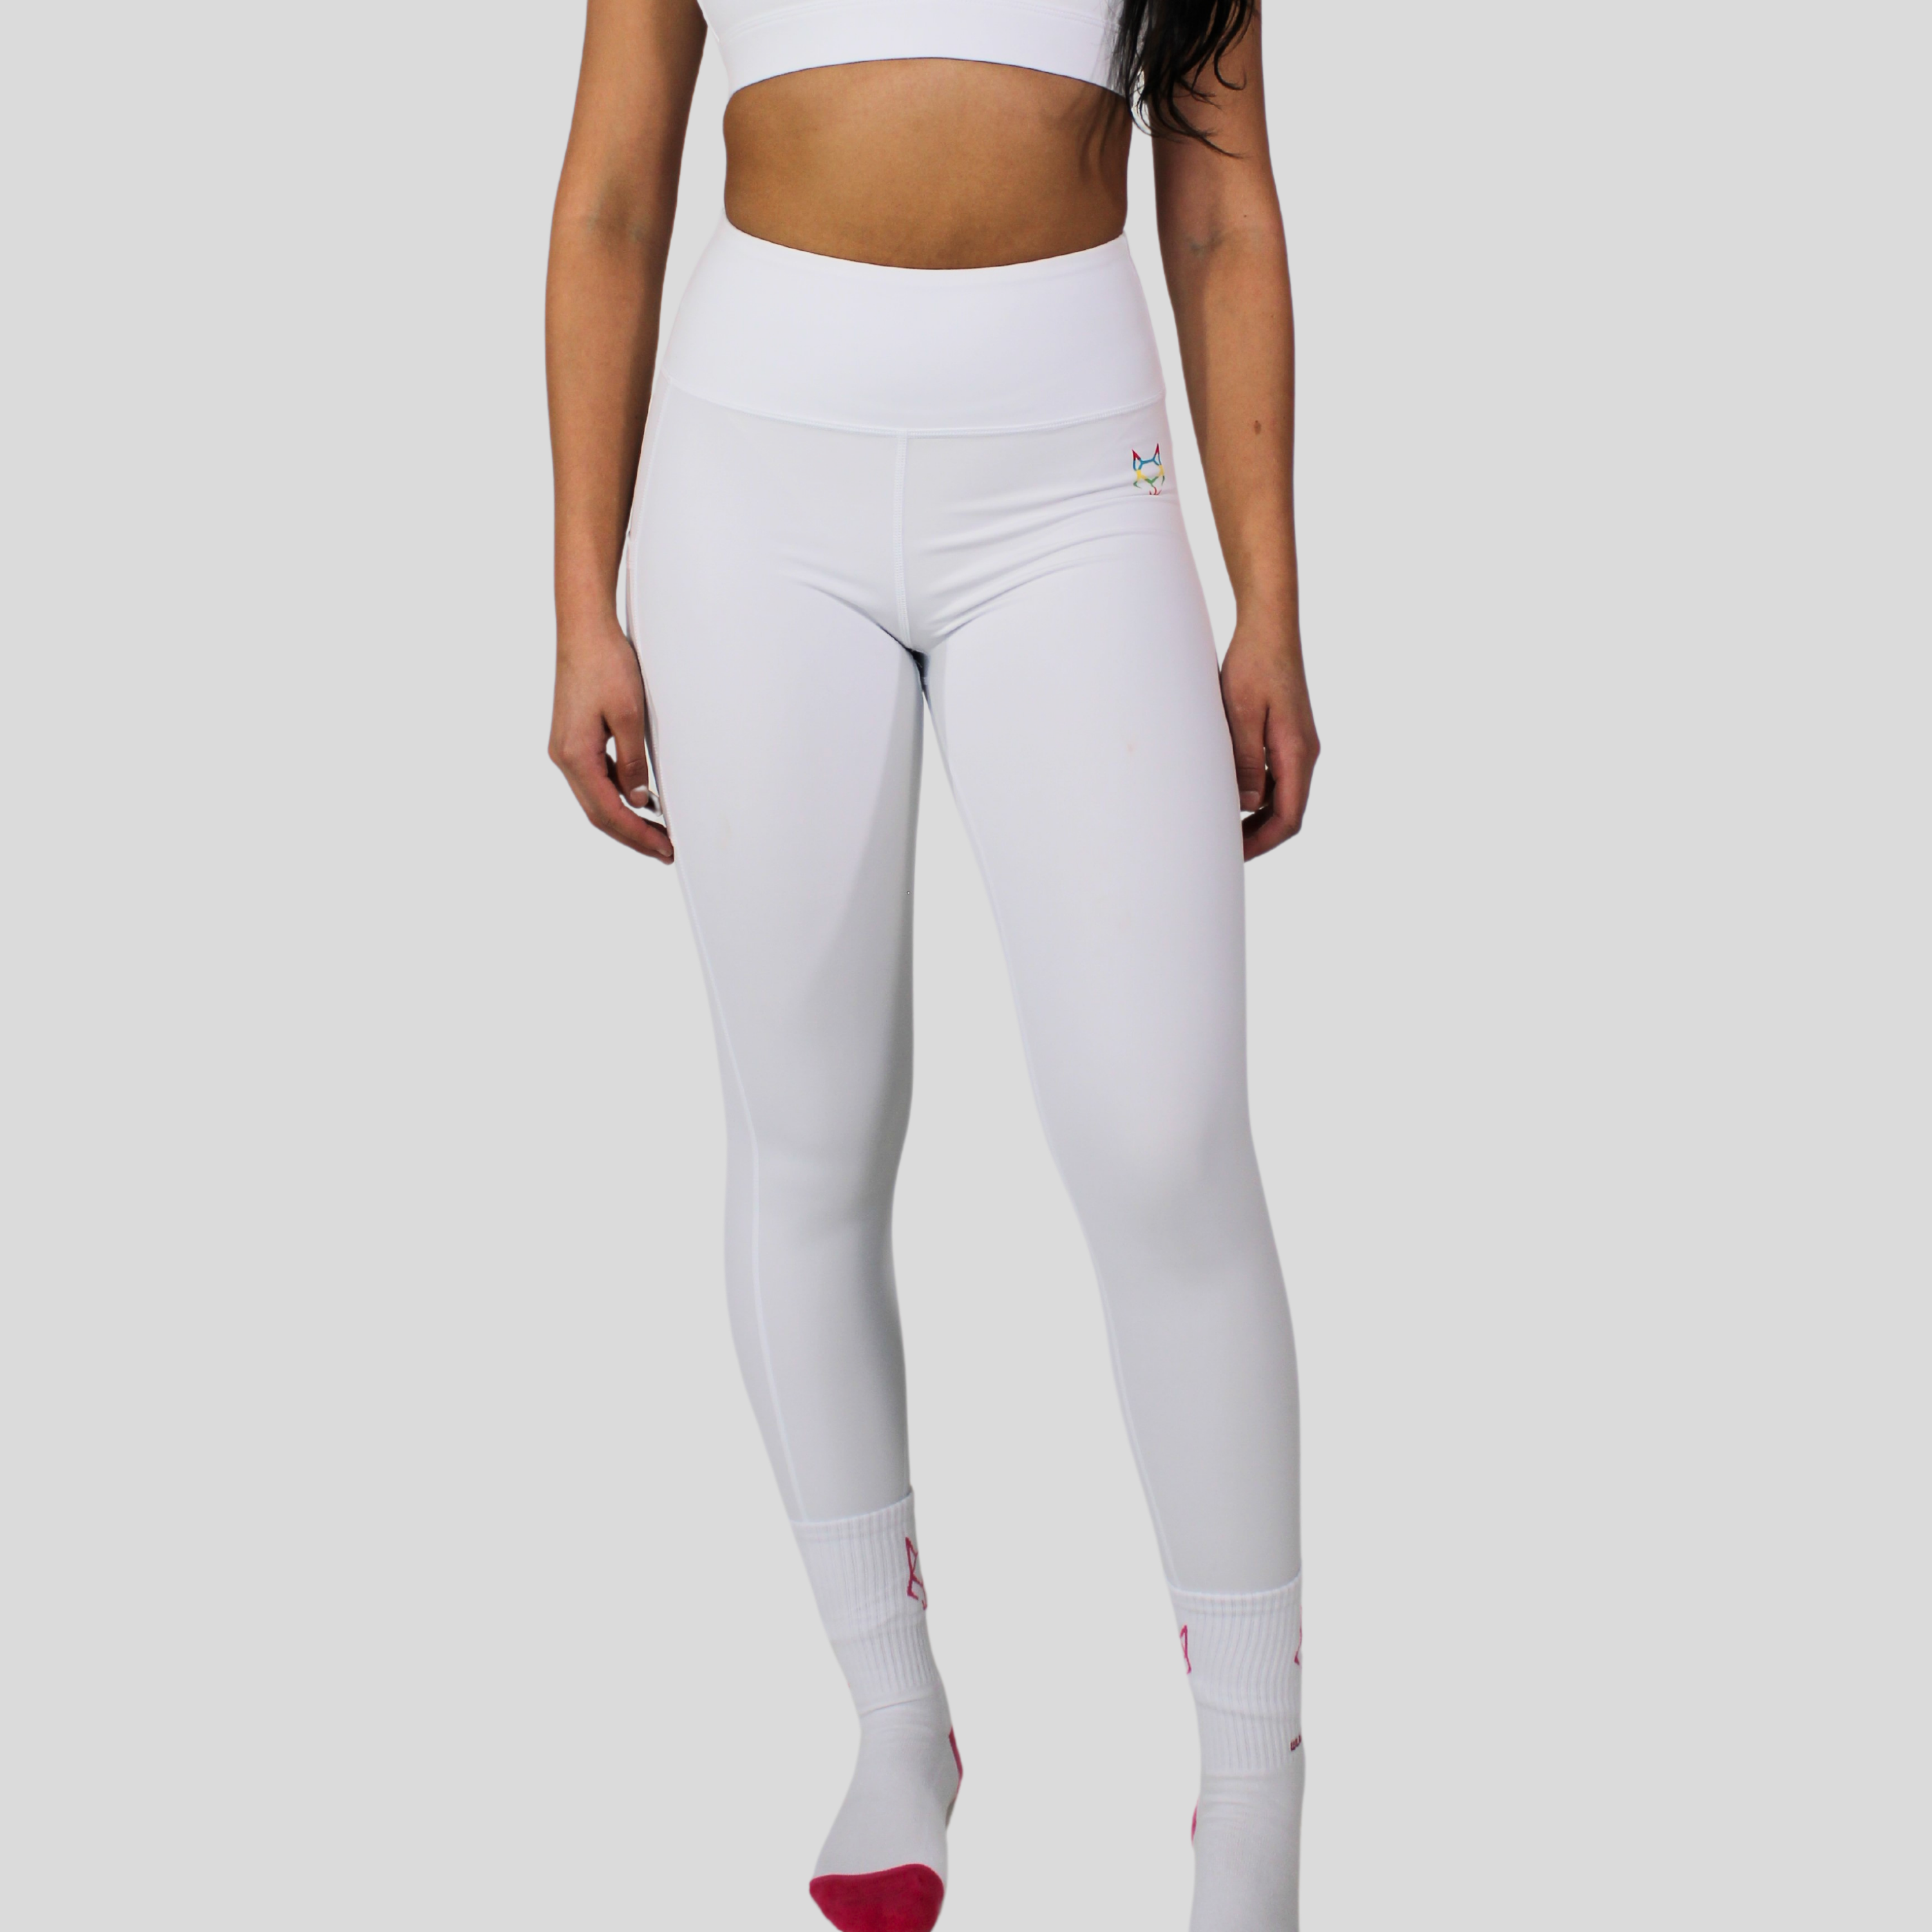 WULF High Waisted Leggings are crafted with meticulous attention to detail, these sports leggings boast a superior blend of high-quality polyester and spandex, ensuring exceptional durability and unrestricted support for your every movement. The high-rise design offers a flattering fit while providing optimal coverage and confidence. Equipped with a conveniently placed pocket, these gym leggings effortlessly merge style and functionality, allowing you to carry your essentials for any activity.